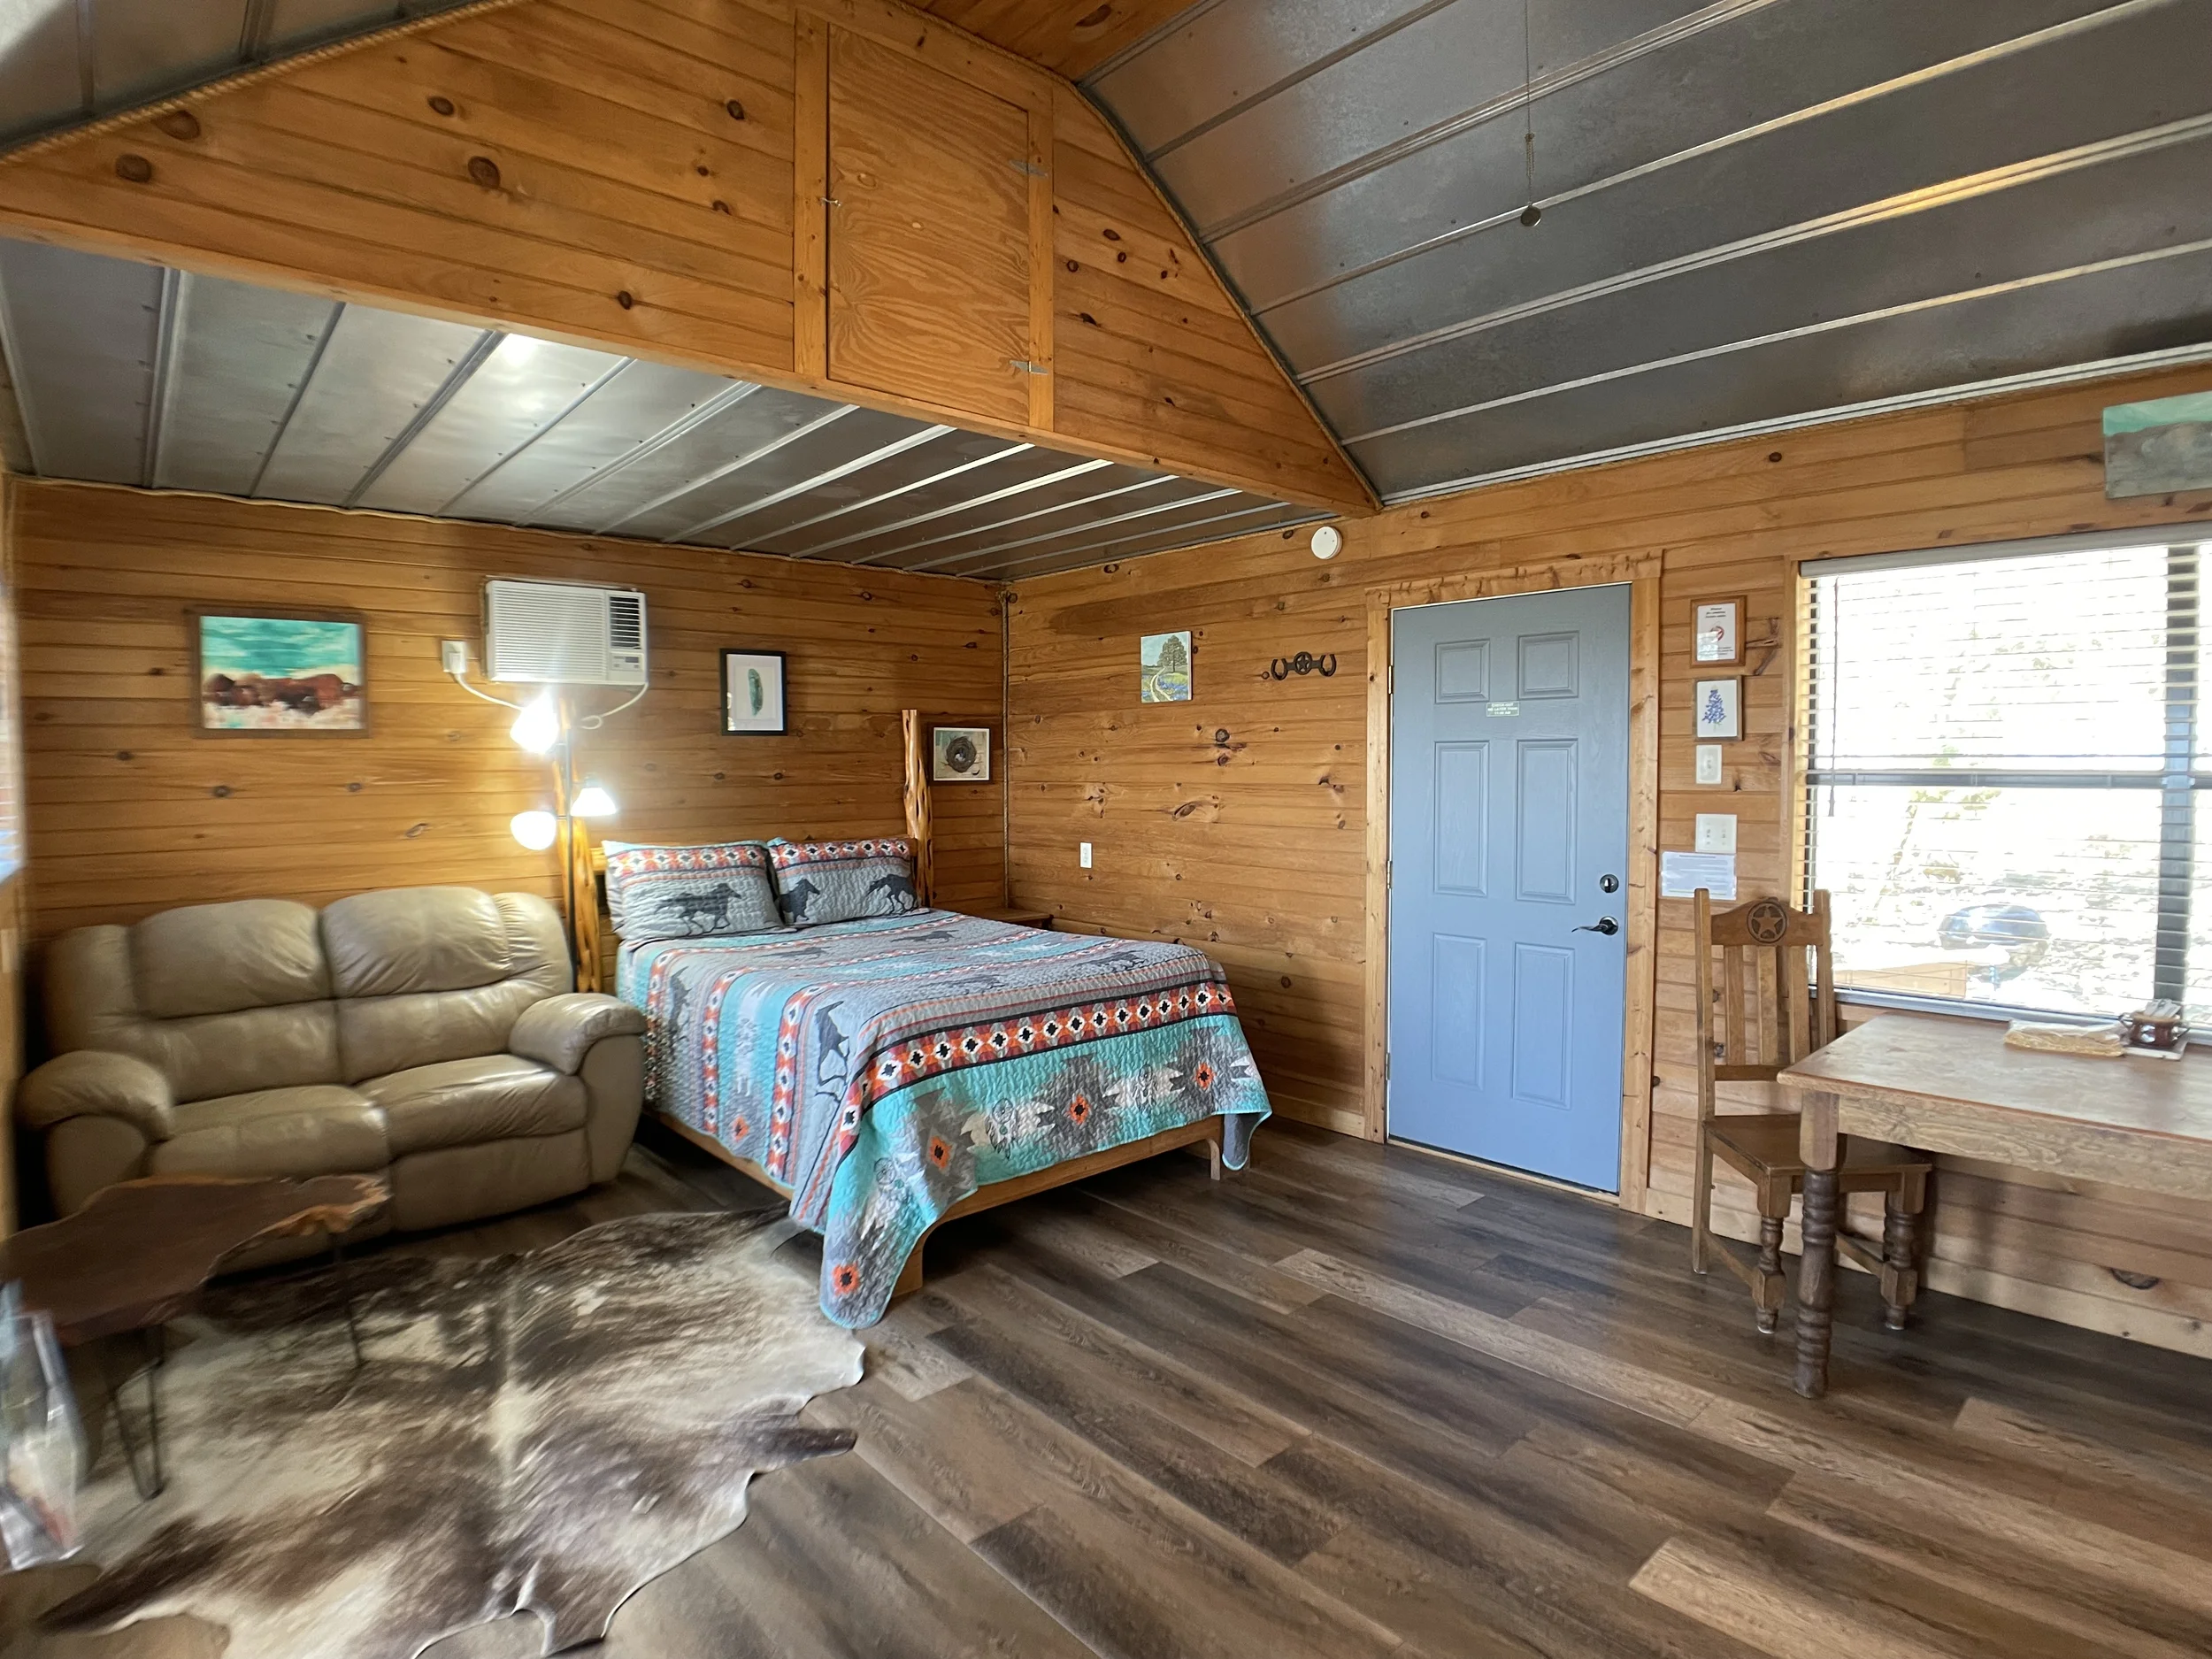 The comfortable bed and front Door from inside the Woods Cabin